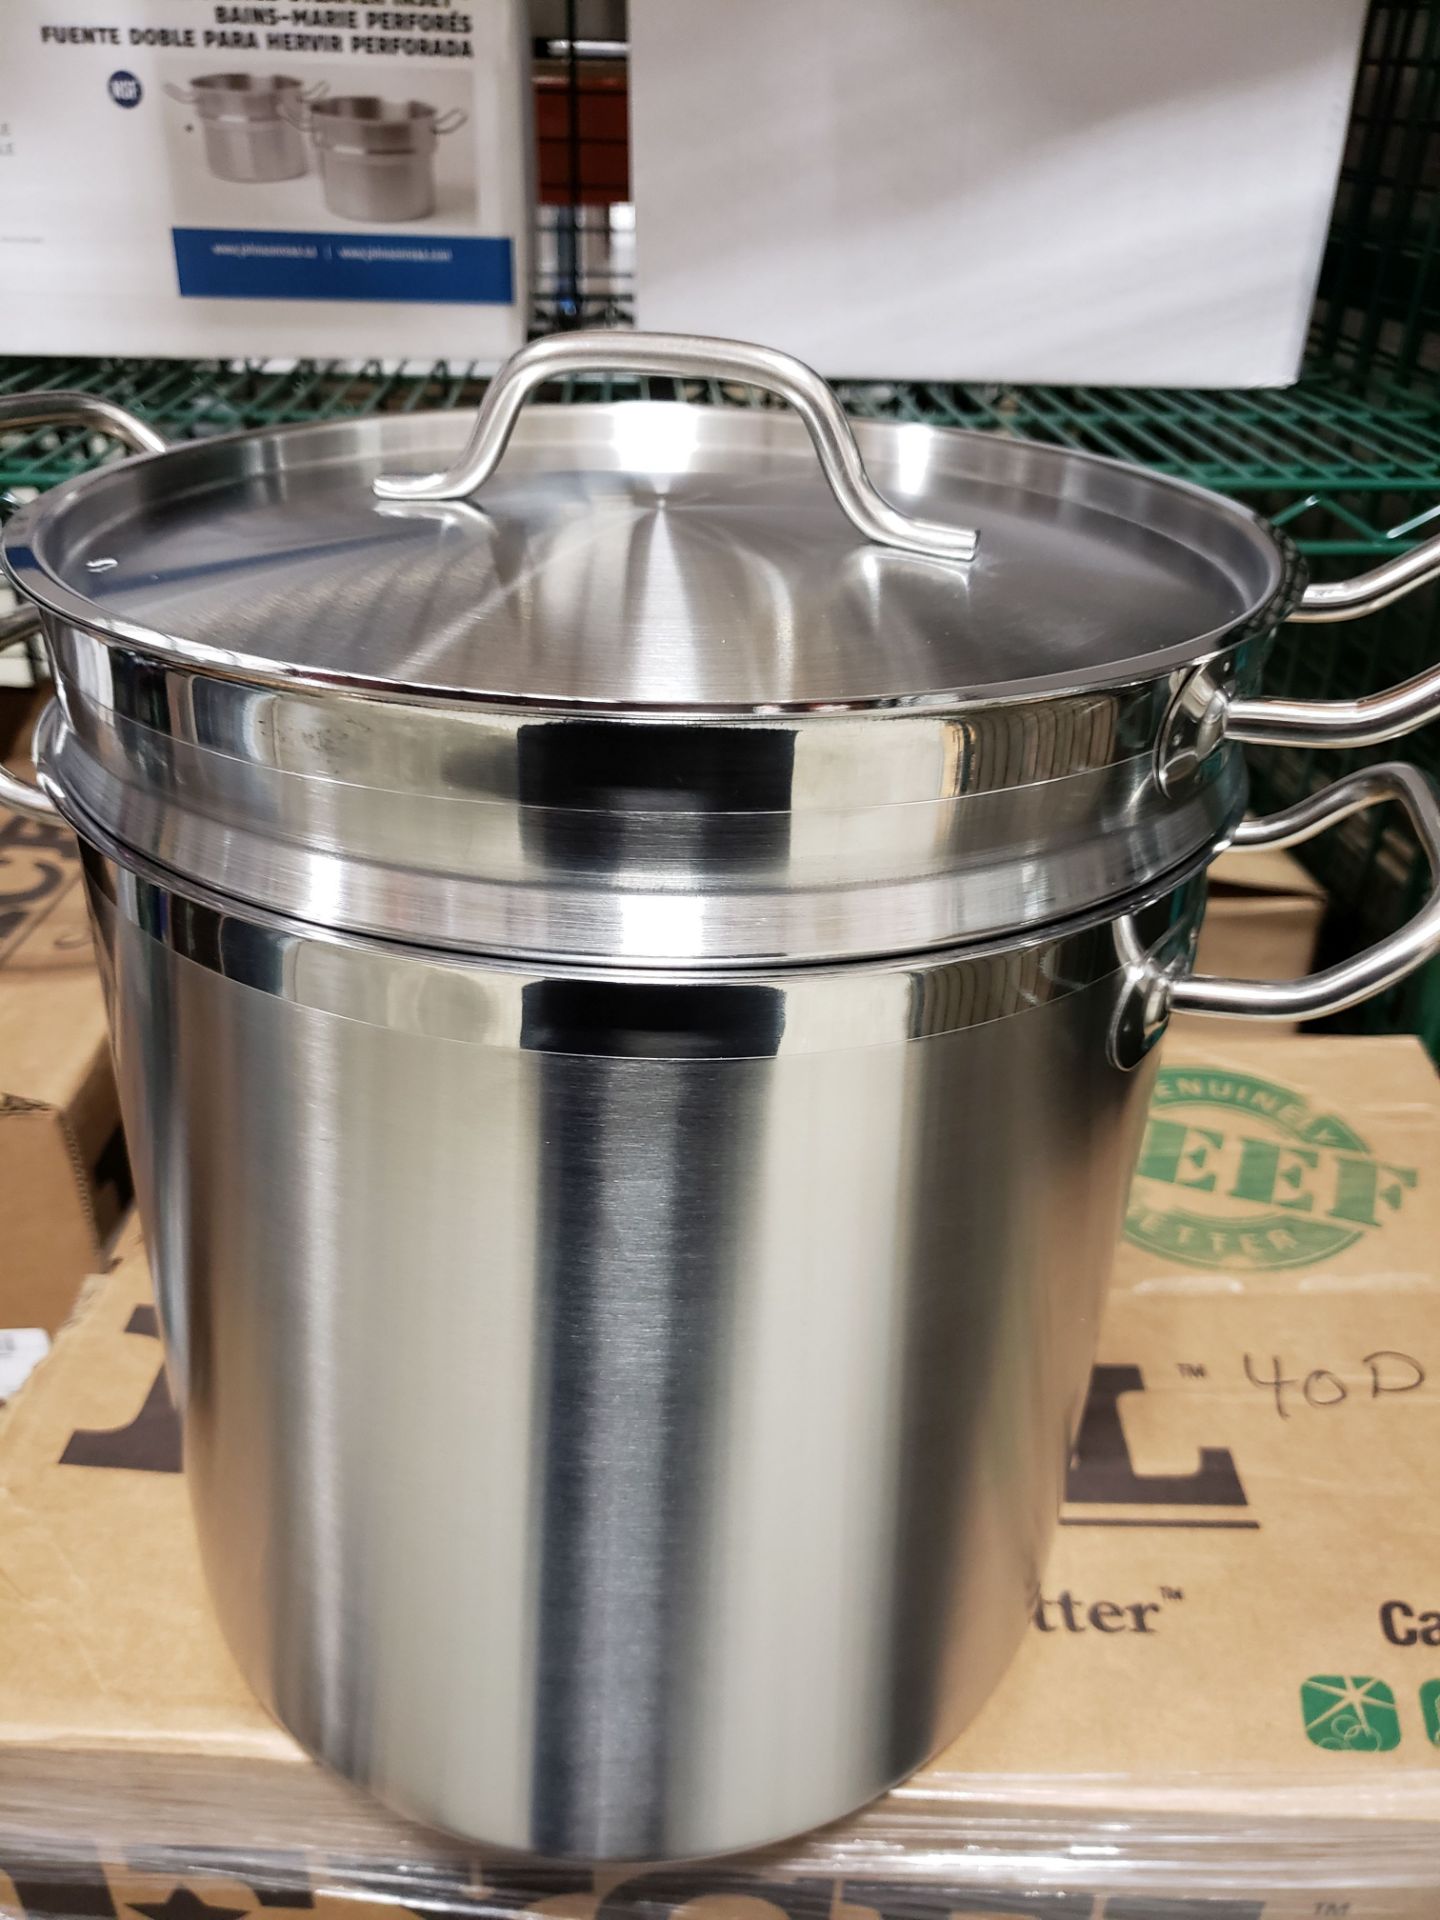 20qt Heavy Duty Stainless Stock Pot with Steamer Basket - Image 4 of 6